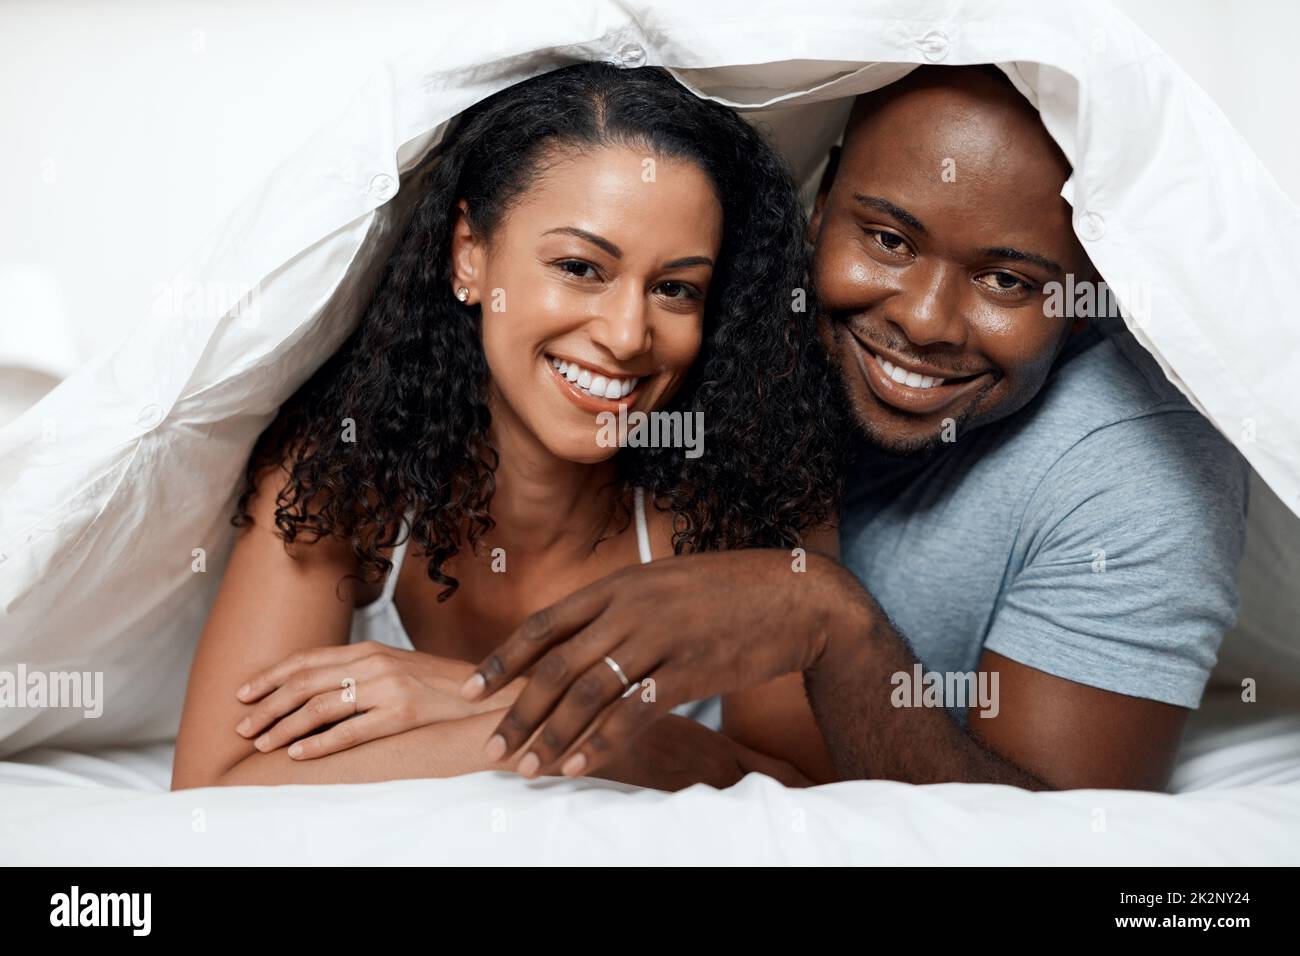 Always in a good mood together. Portrait of a cheerful young couple lying in bed together under a blanket while looking at the camera at home in the morning. Stock Photo